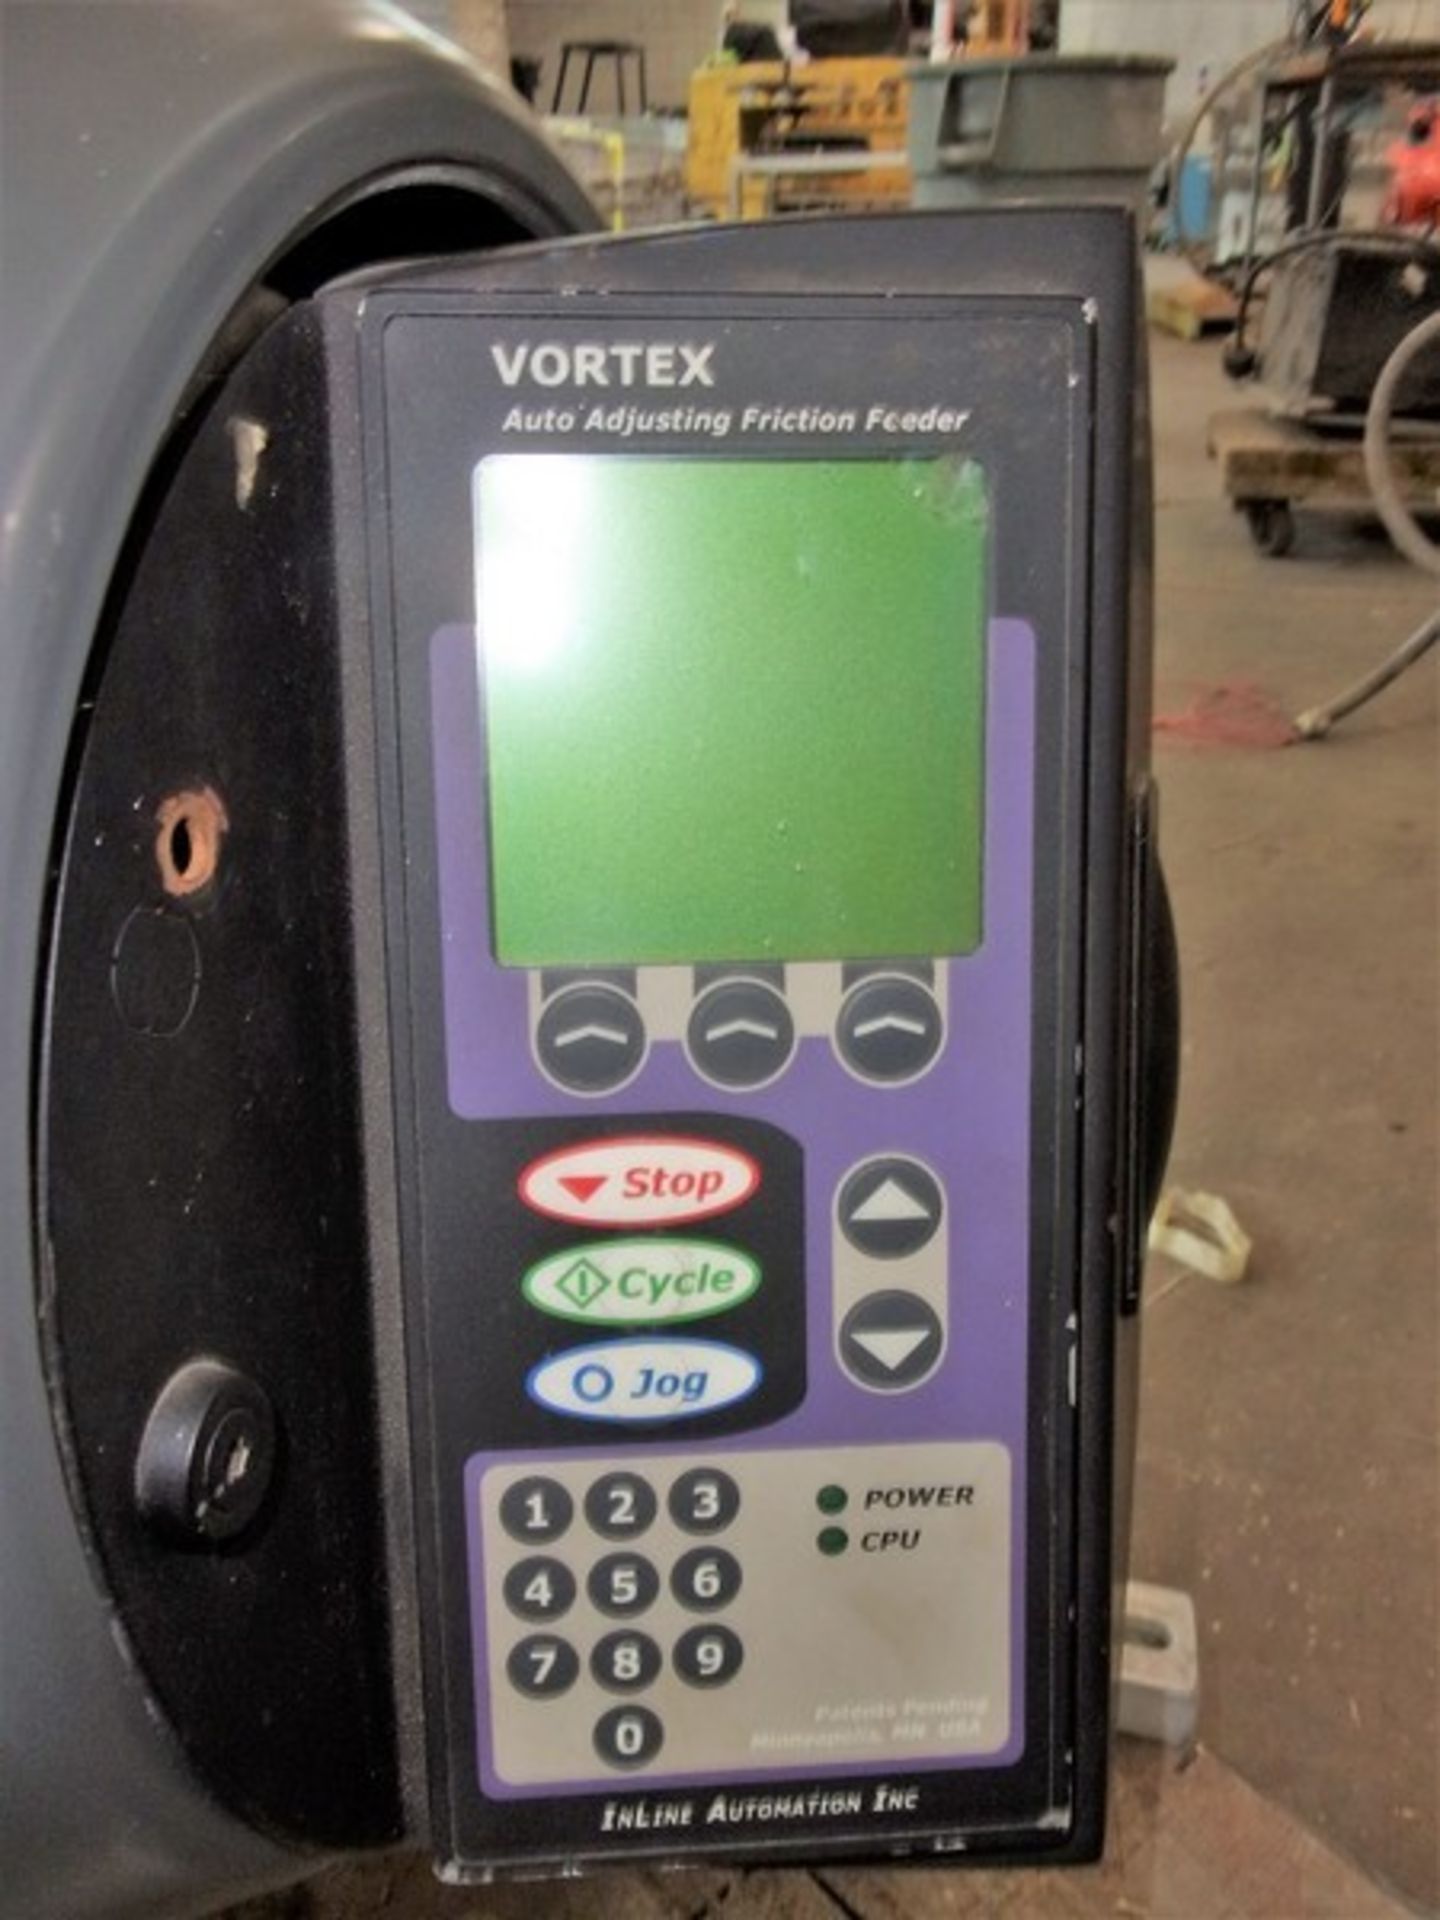 Vortex Inline Automation Auto Adjusting Friction Feeder, Model 1200L, S/N 040803, Unit was last used - Image 8 of 8